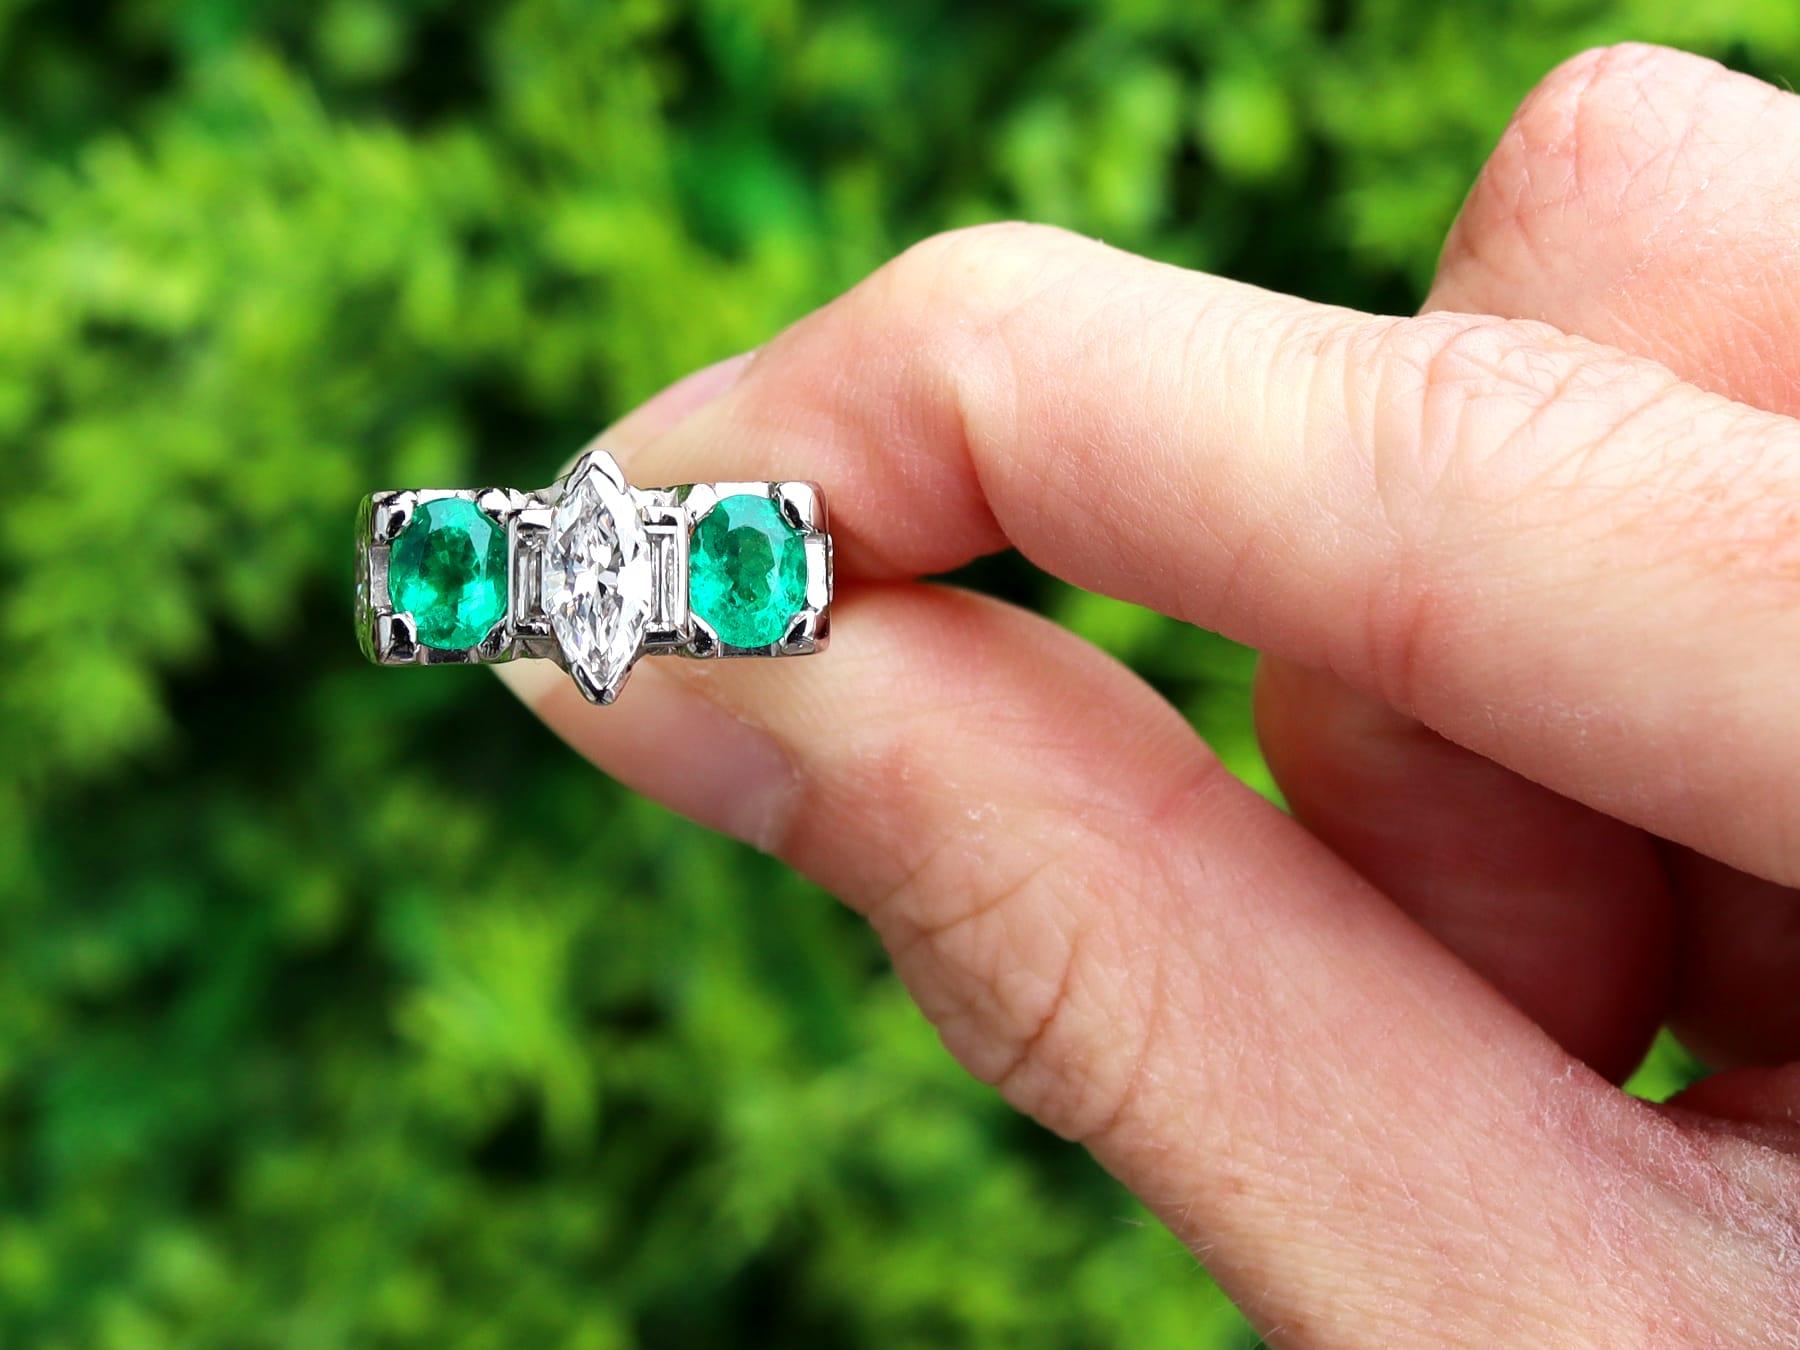 This stunning, fine and impressive vintage emerald and diamond ring has been crafted in platinum.

The rectangular, subtly stepped design is ornamented with a feature 1.15ct marquise cut diamond, claw set in relief to the center.

The diamond is